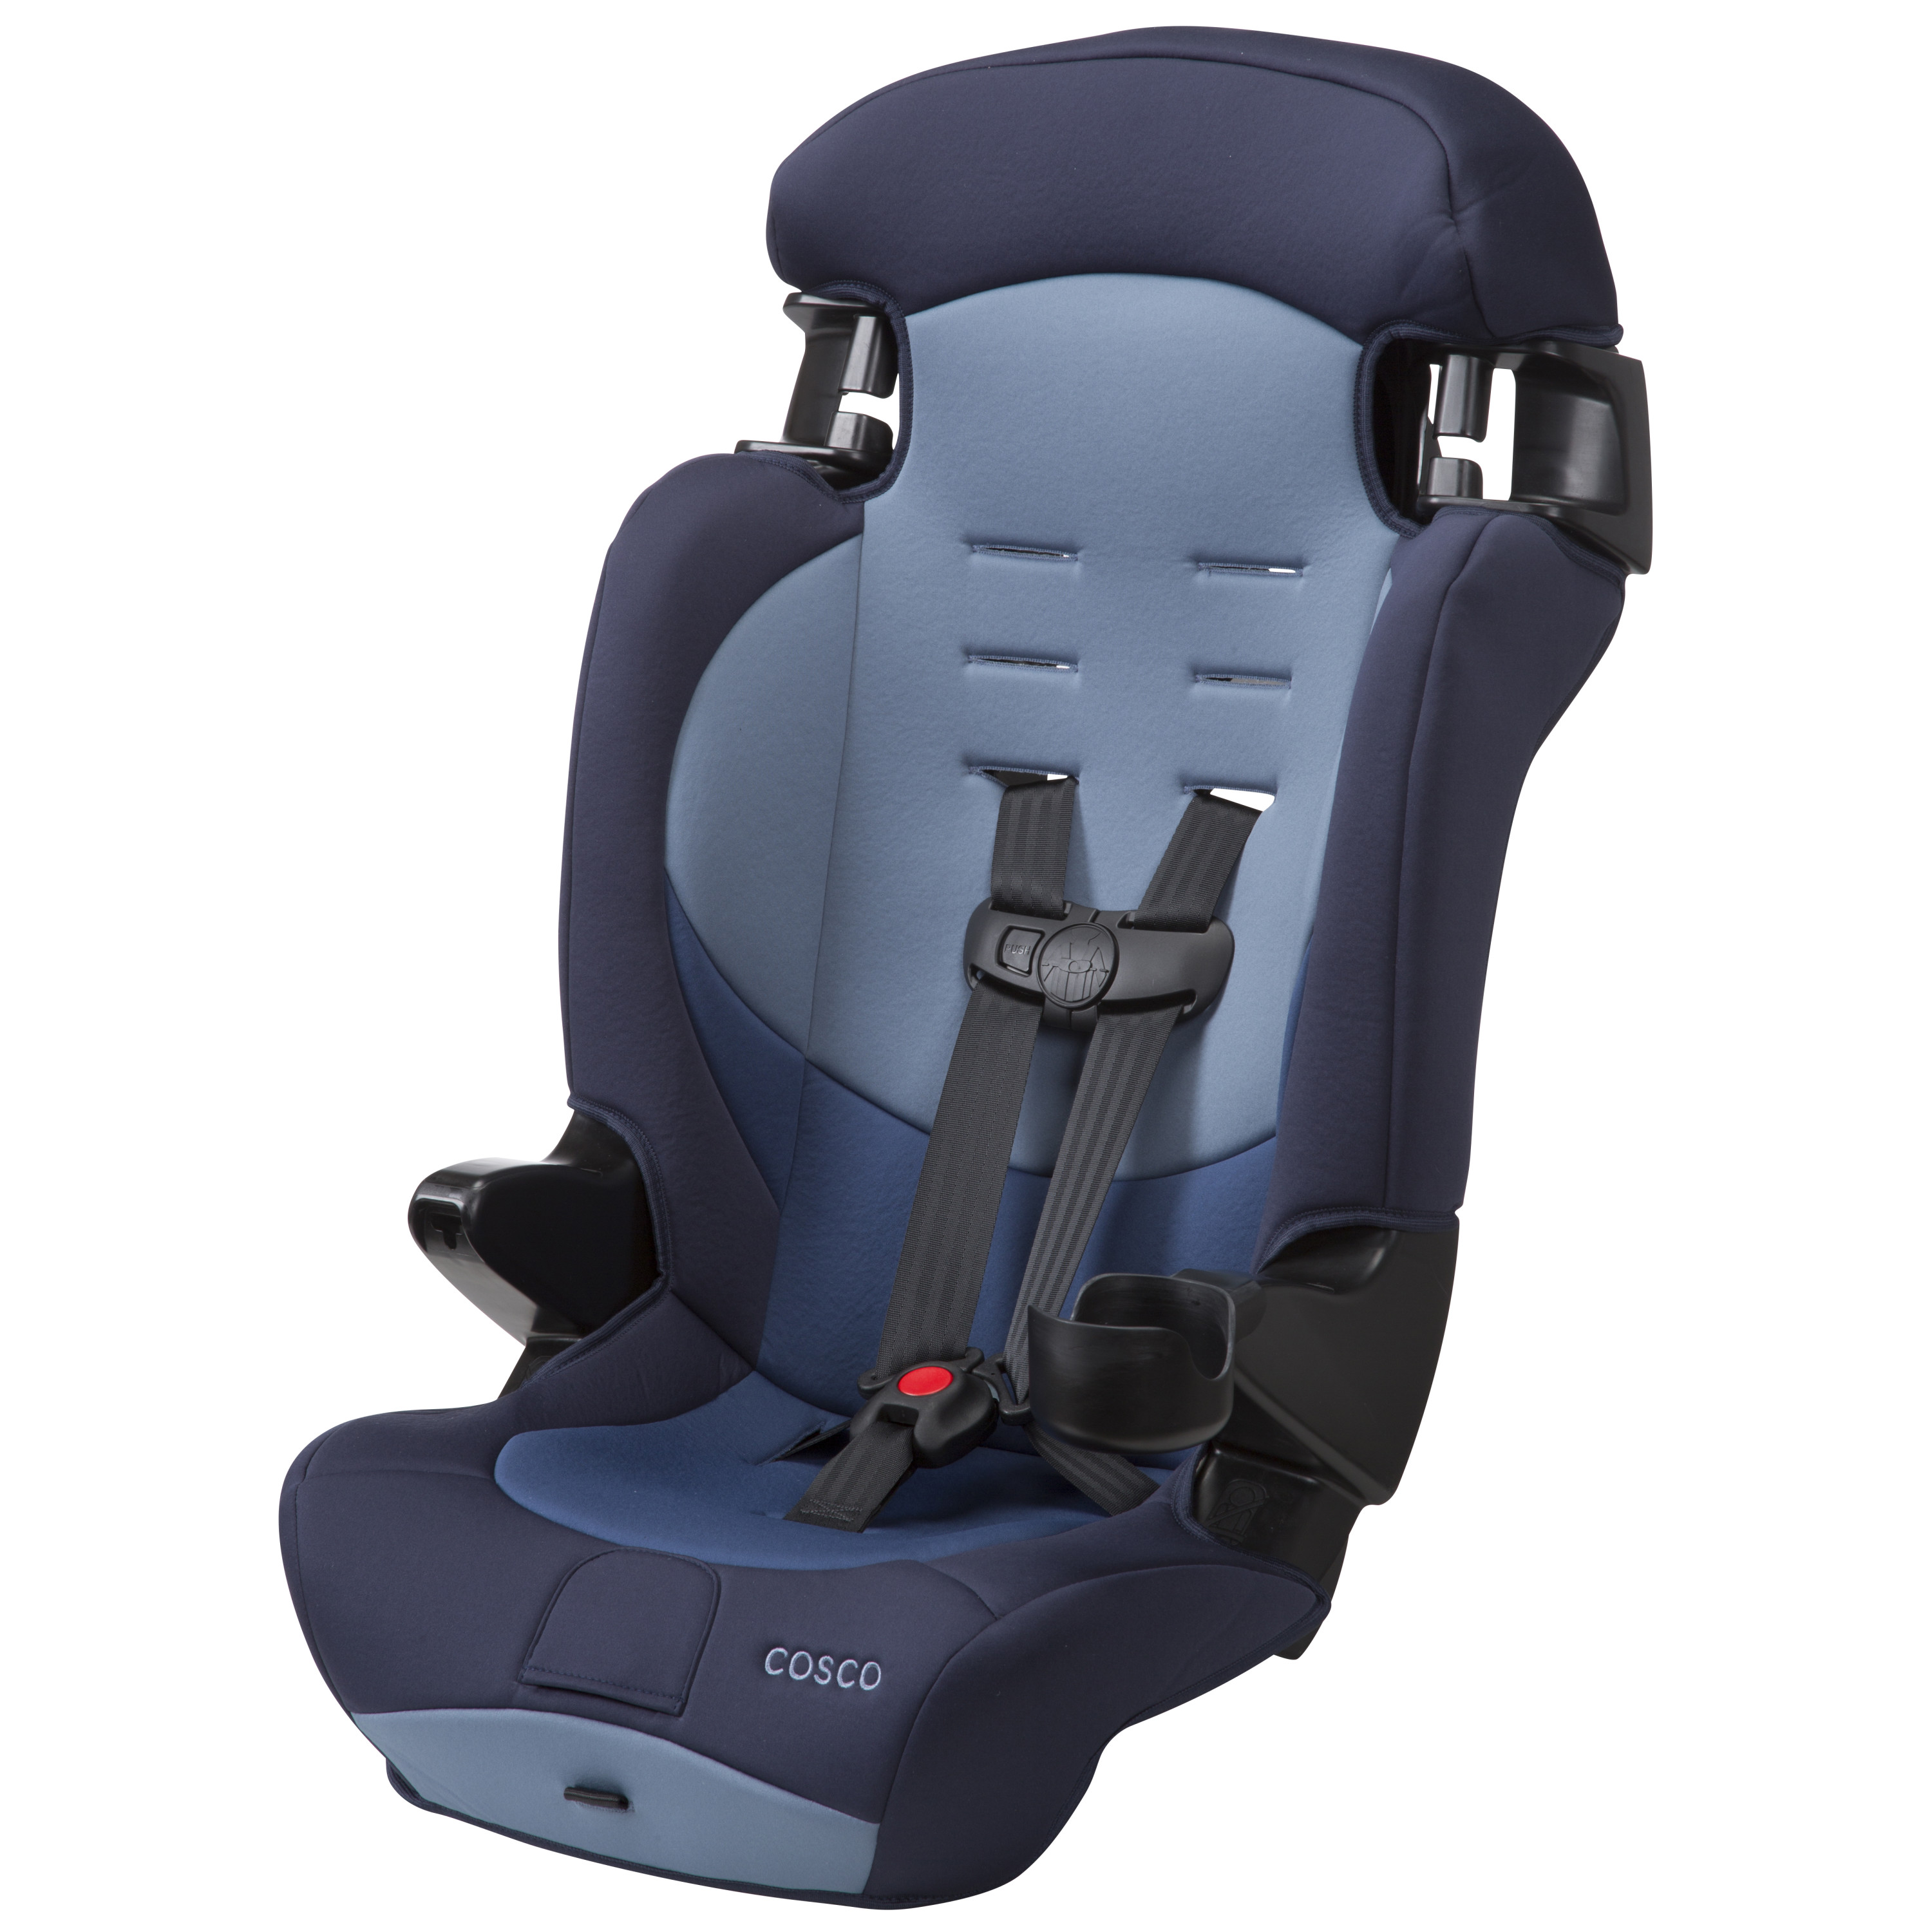 Cosco Kids Finale DX 2-in-1 Booster Car Seat, Sport Blue - image 1 of 24